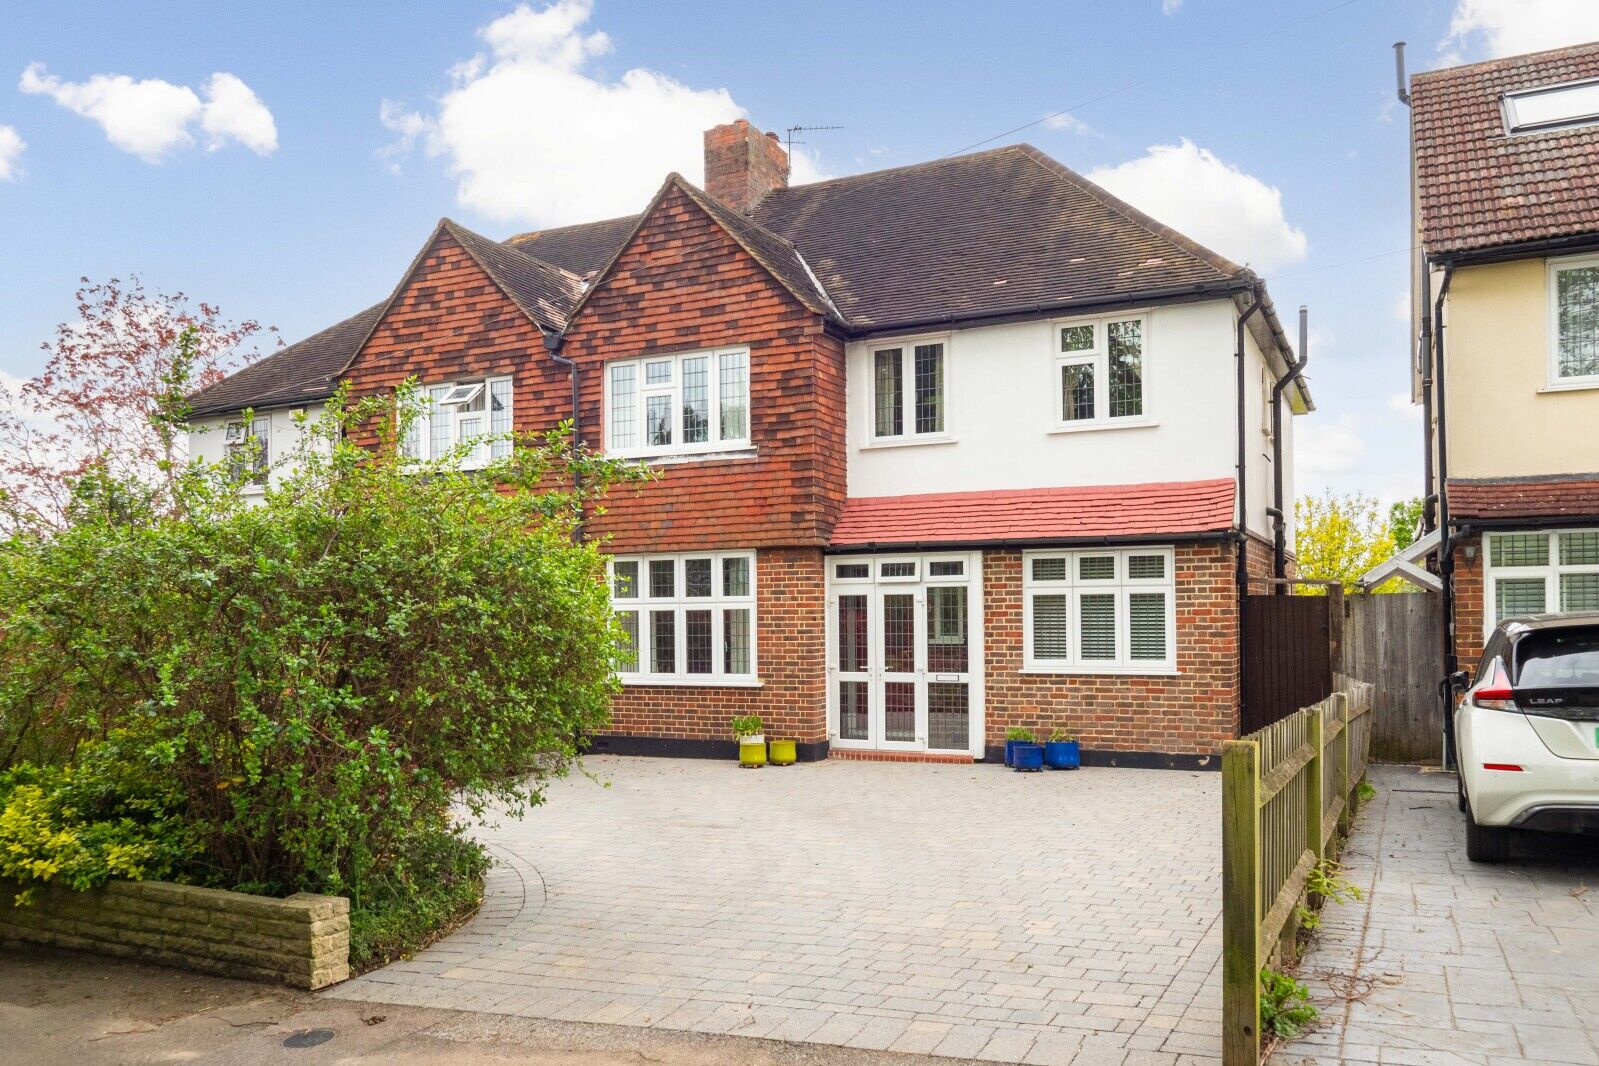 4 bedroom semi detached house for sale Cheam Road, Cheam, SM1, main image